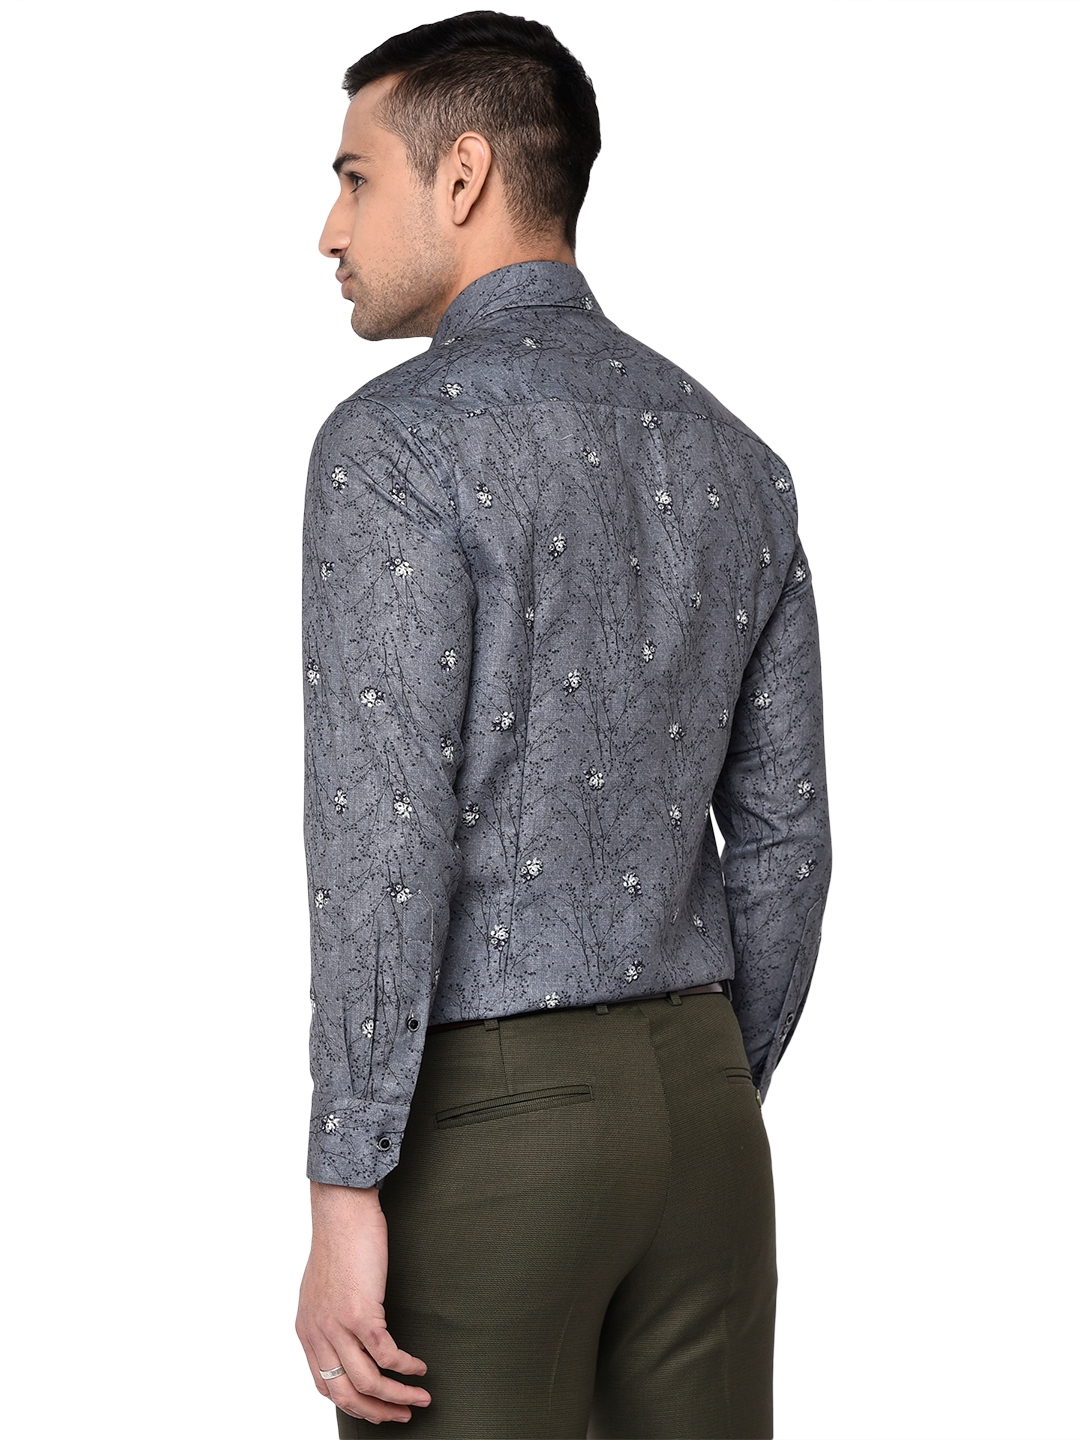 Slate Grey Printed Slim Fit Party Wear Shirt | Greenfibre